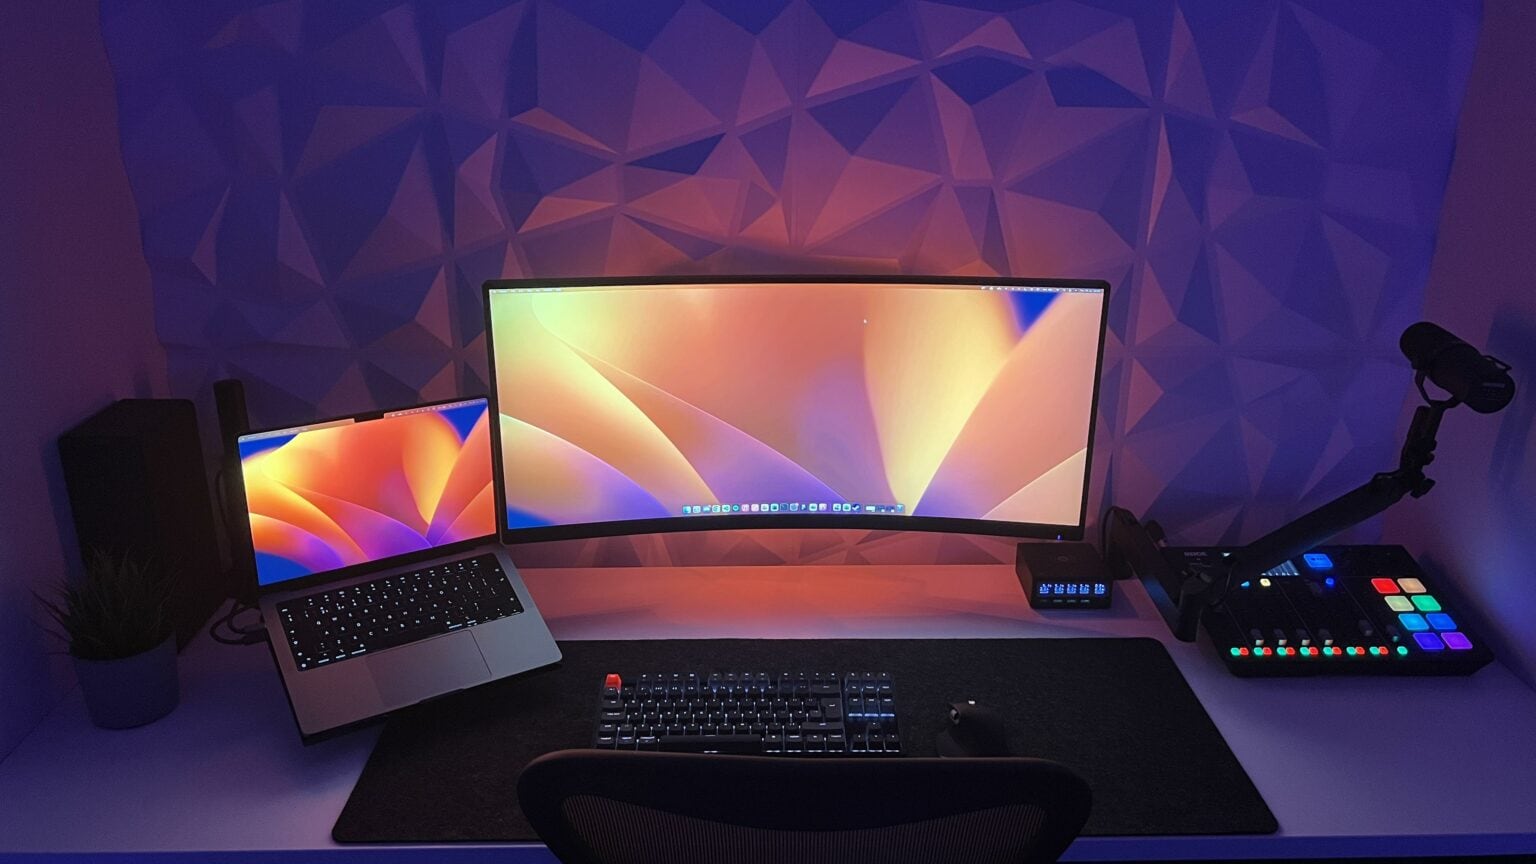 Look how the wall panels interact with the desktop wallpaper.